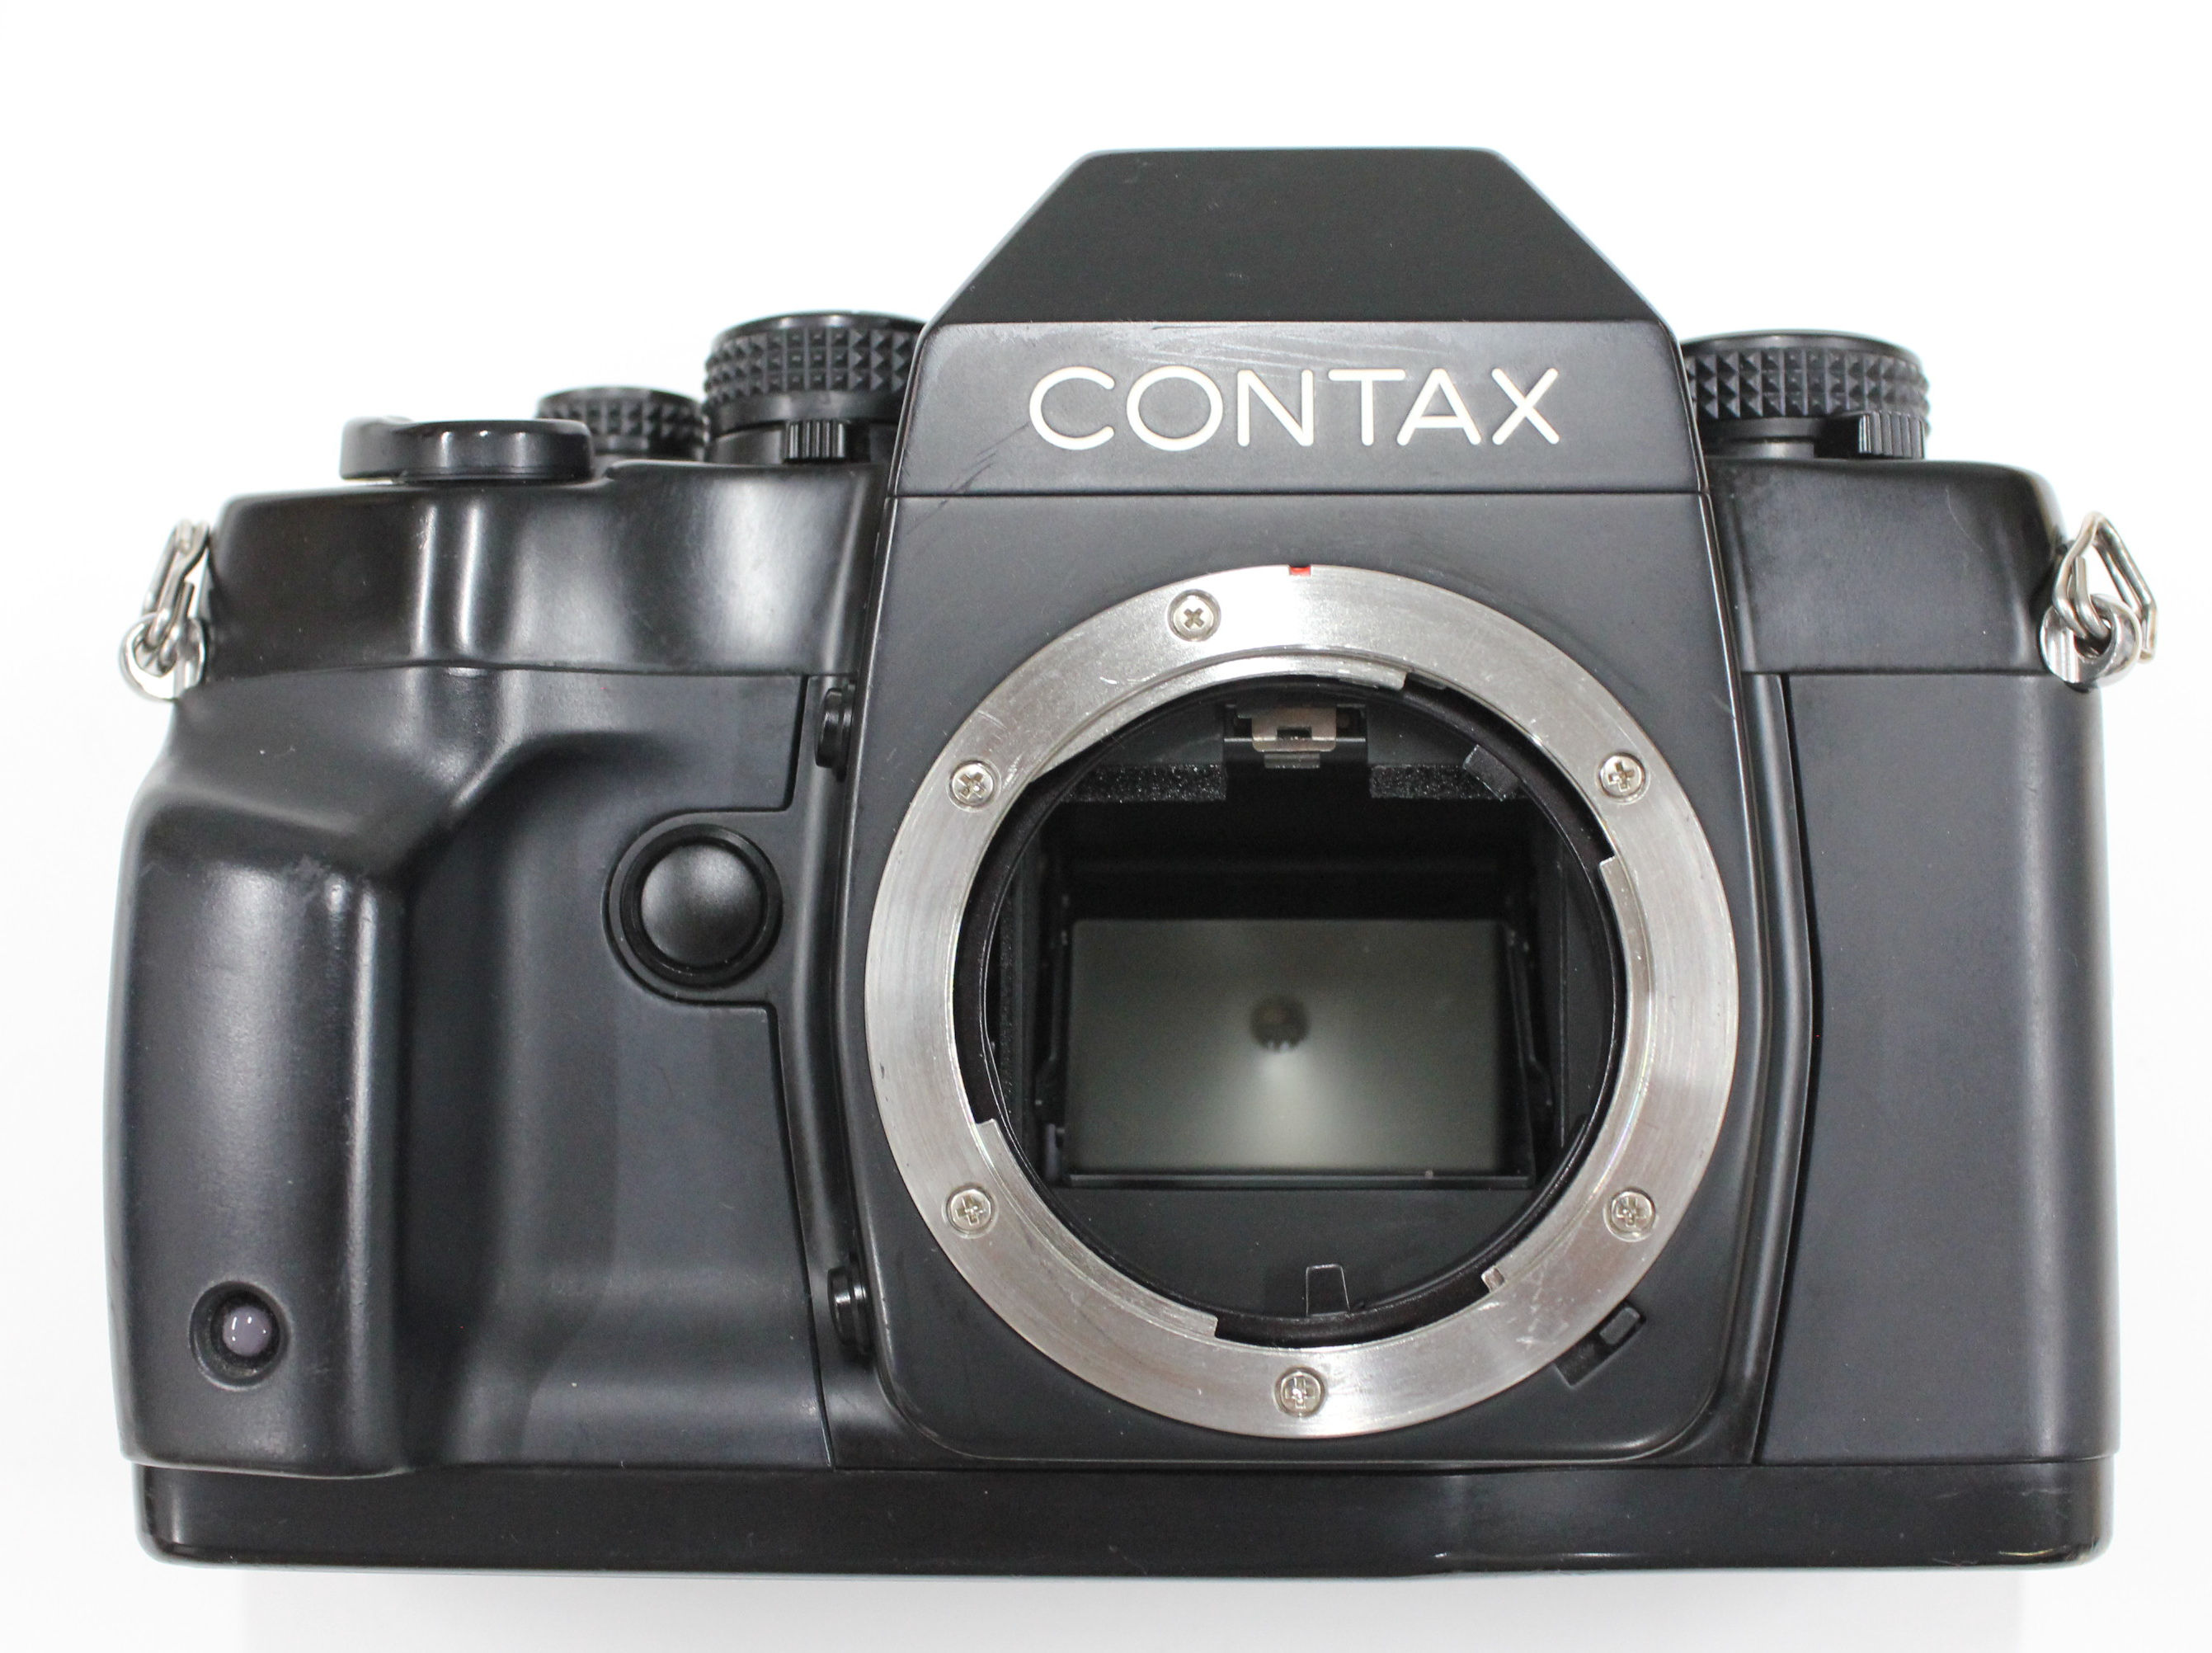  Contax RX 35mm SLR Film Camera Black Body with Box from Japan Photo 2